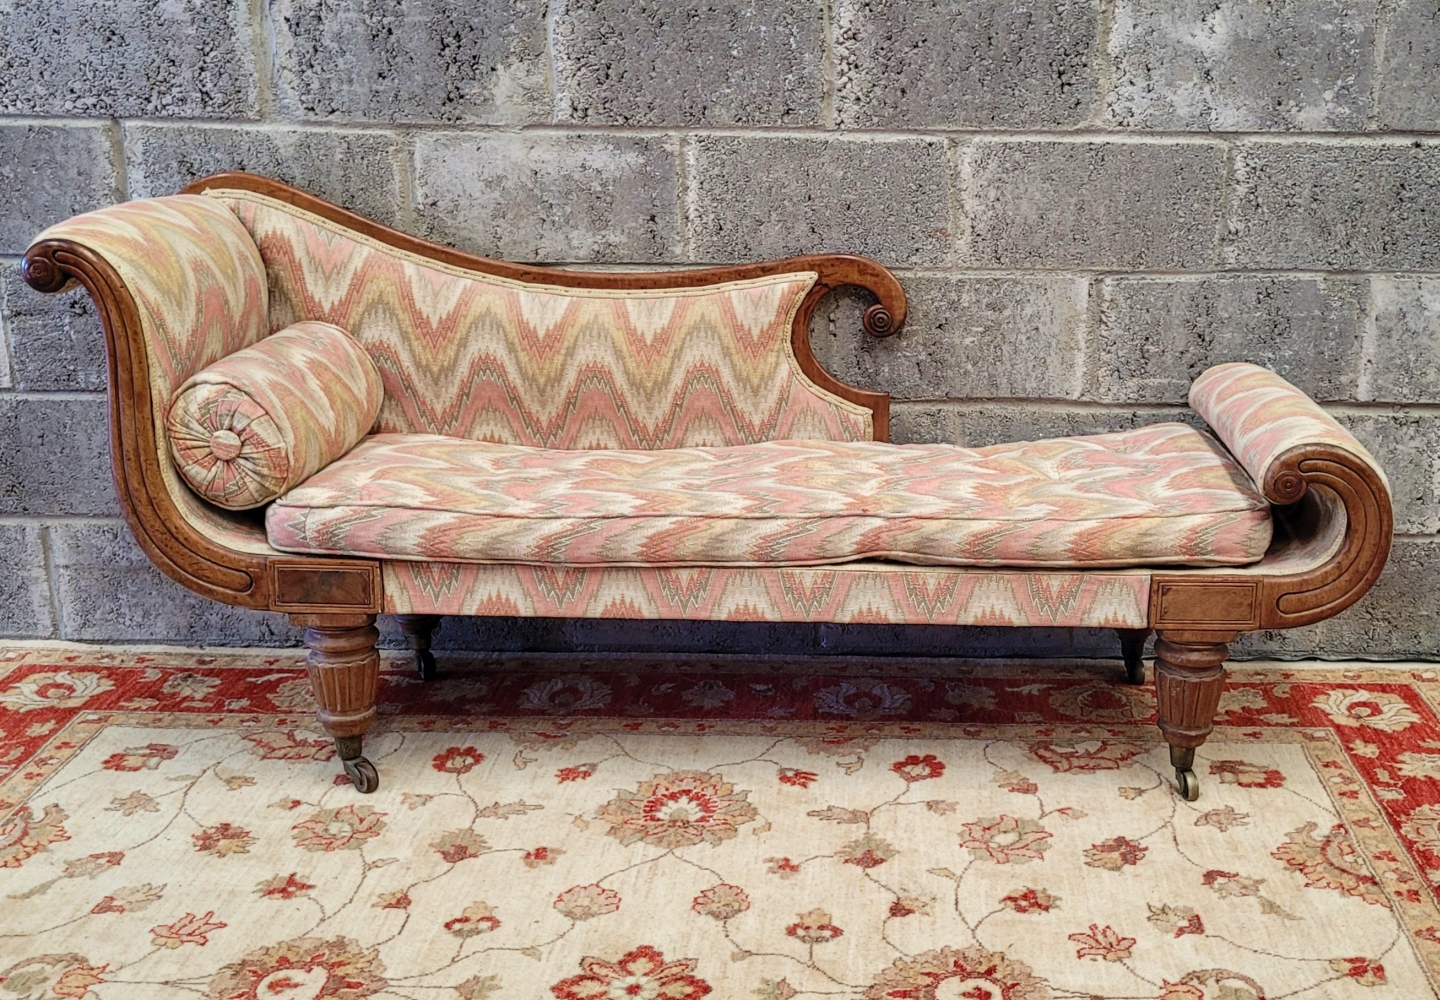 GOOD EARLY 19TH CENTURY DAY BED / CHAISE LONGUE, with scrolling rests, raised on reeded turned legs